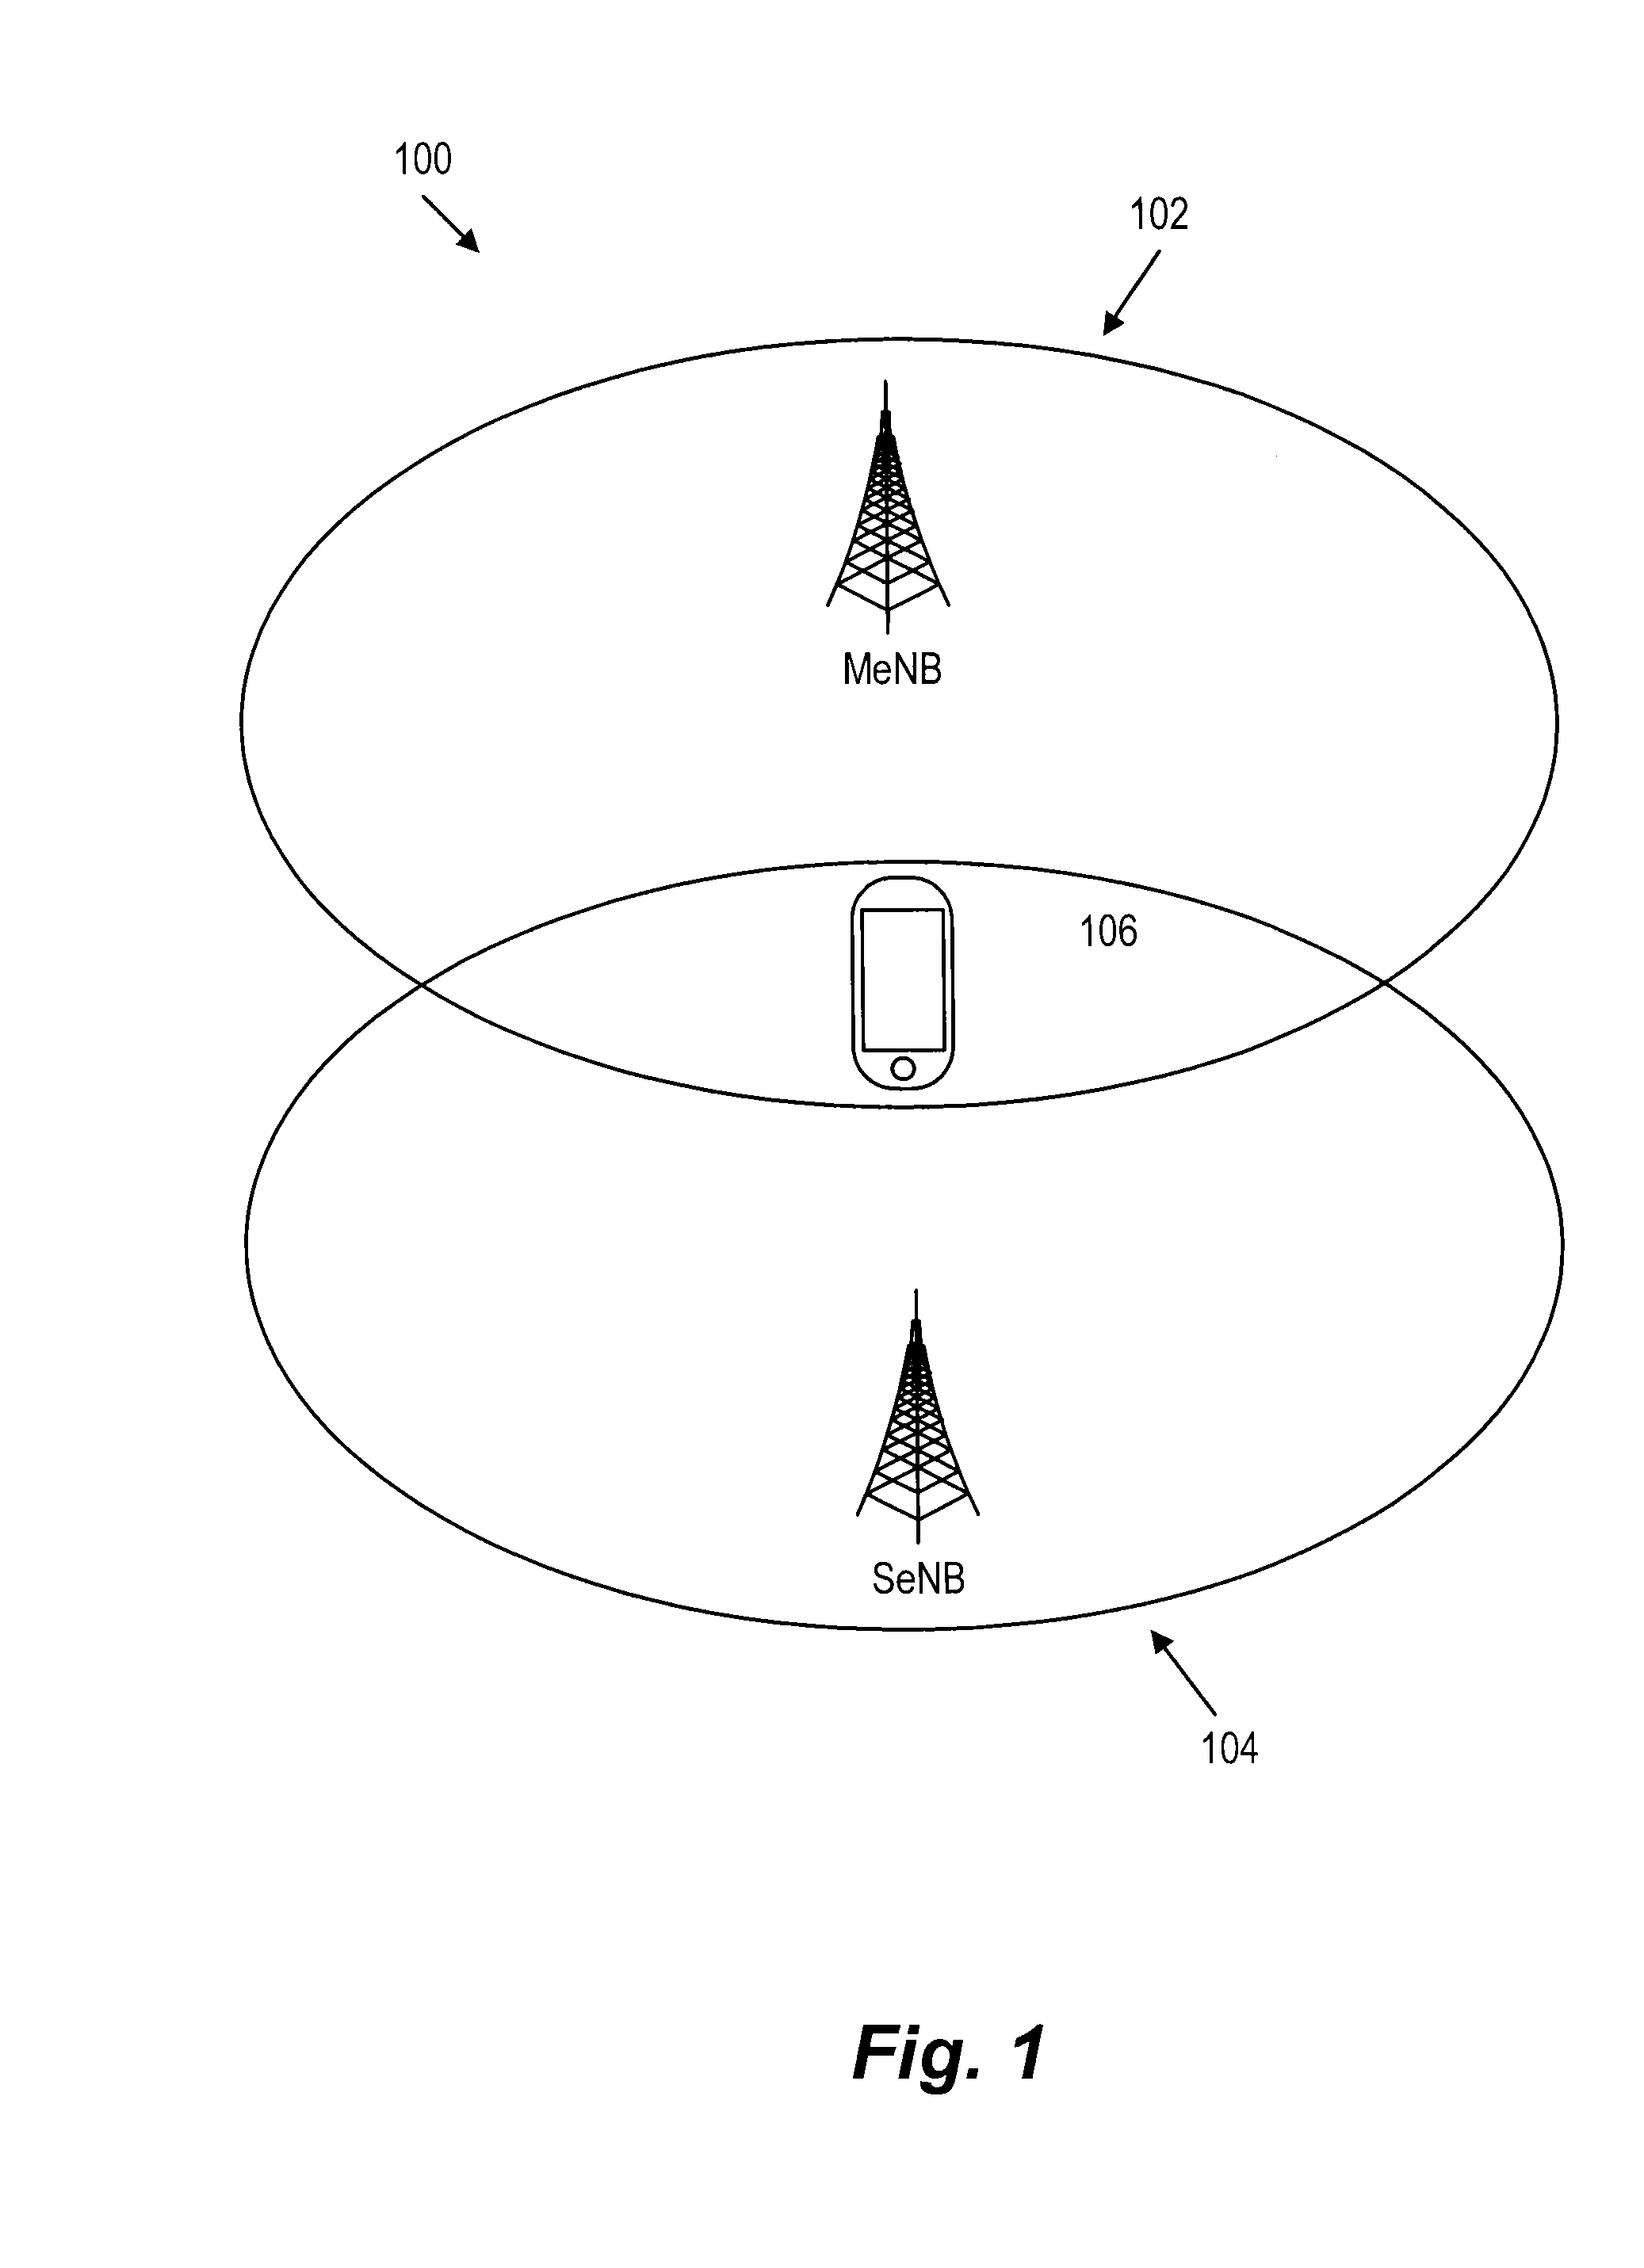 Uplink power scaling for dual connectivity